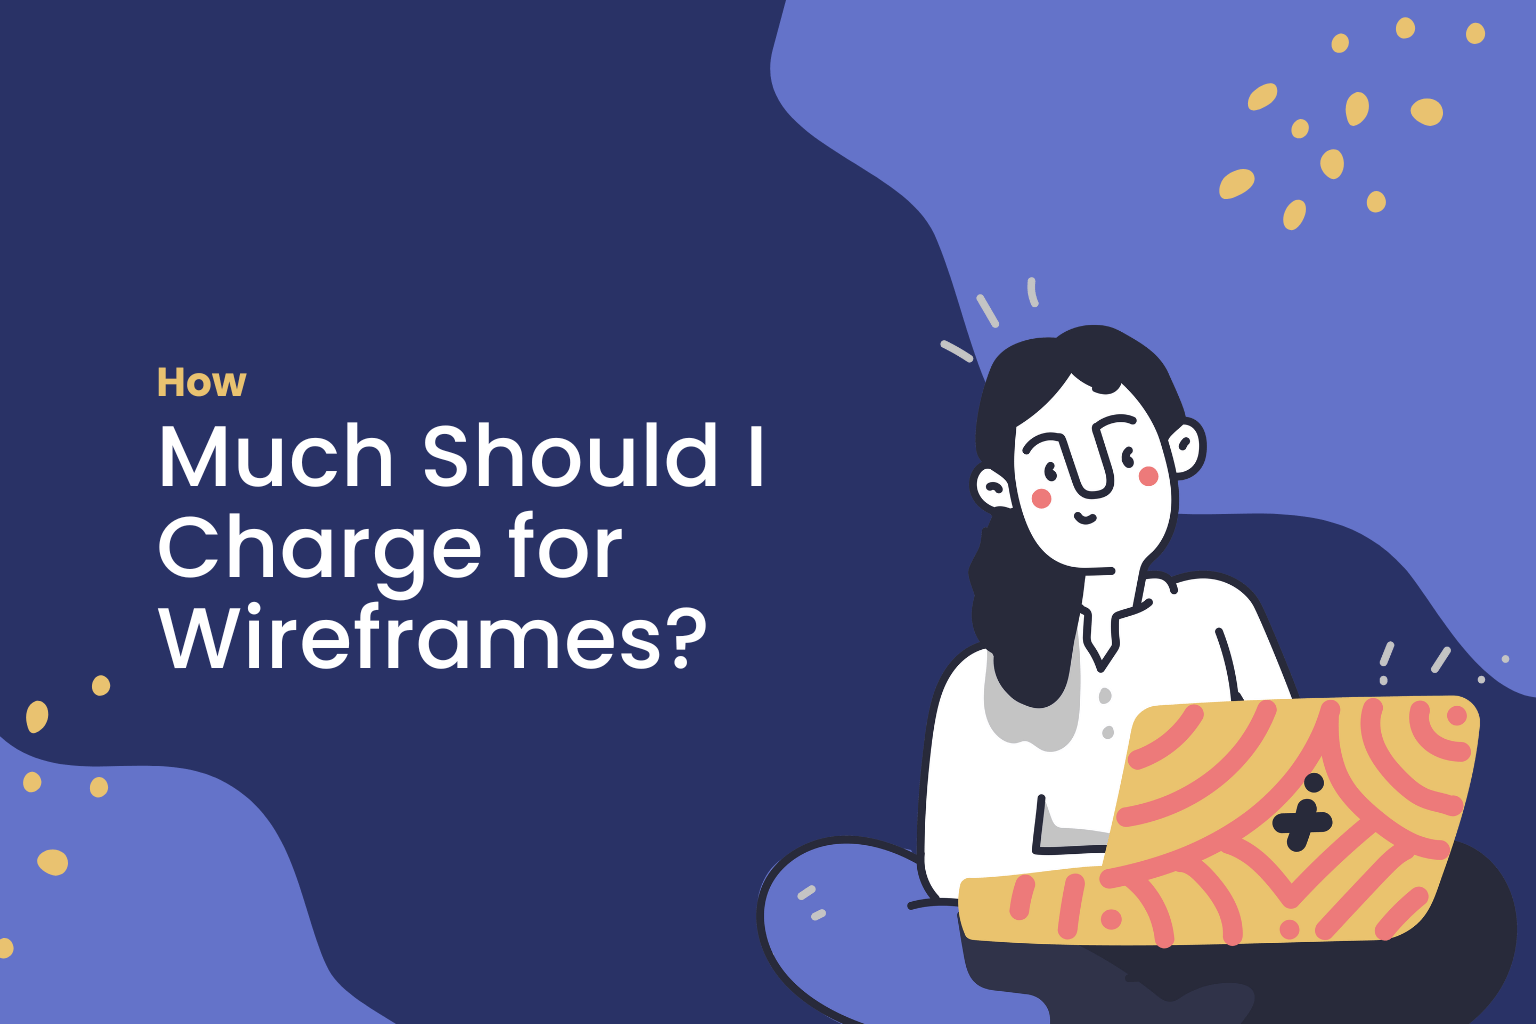 How Much Should I Charge for Wireframes?